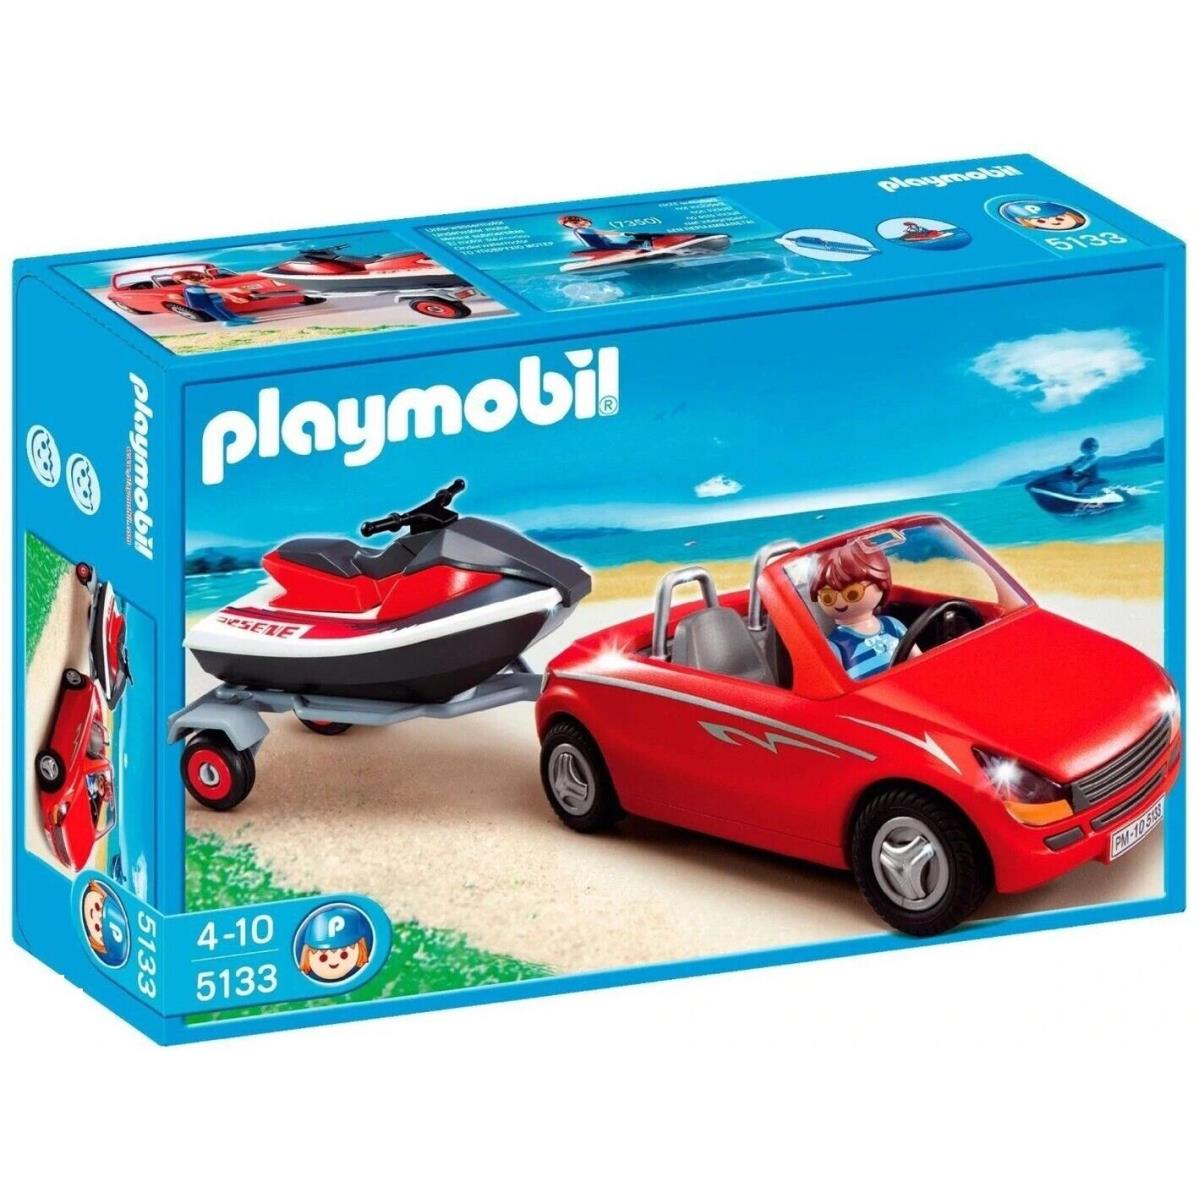 Playmobil Toy Play Set 5133 Red Convertible Sports Car with Jetski